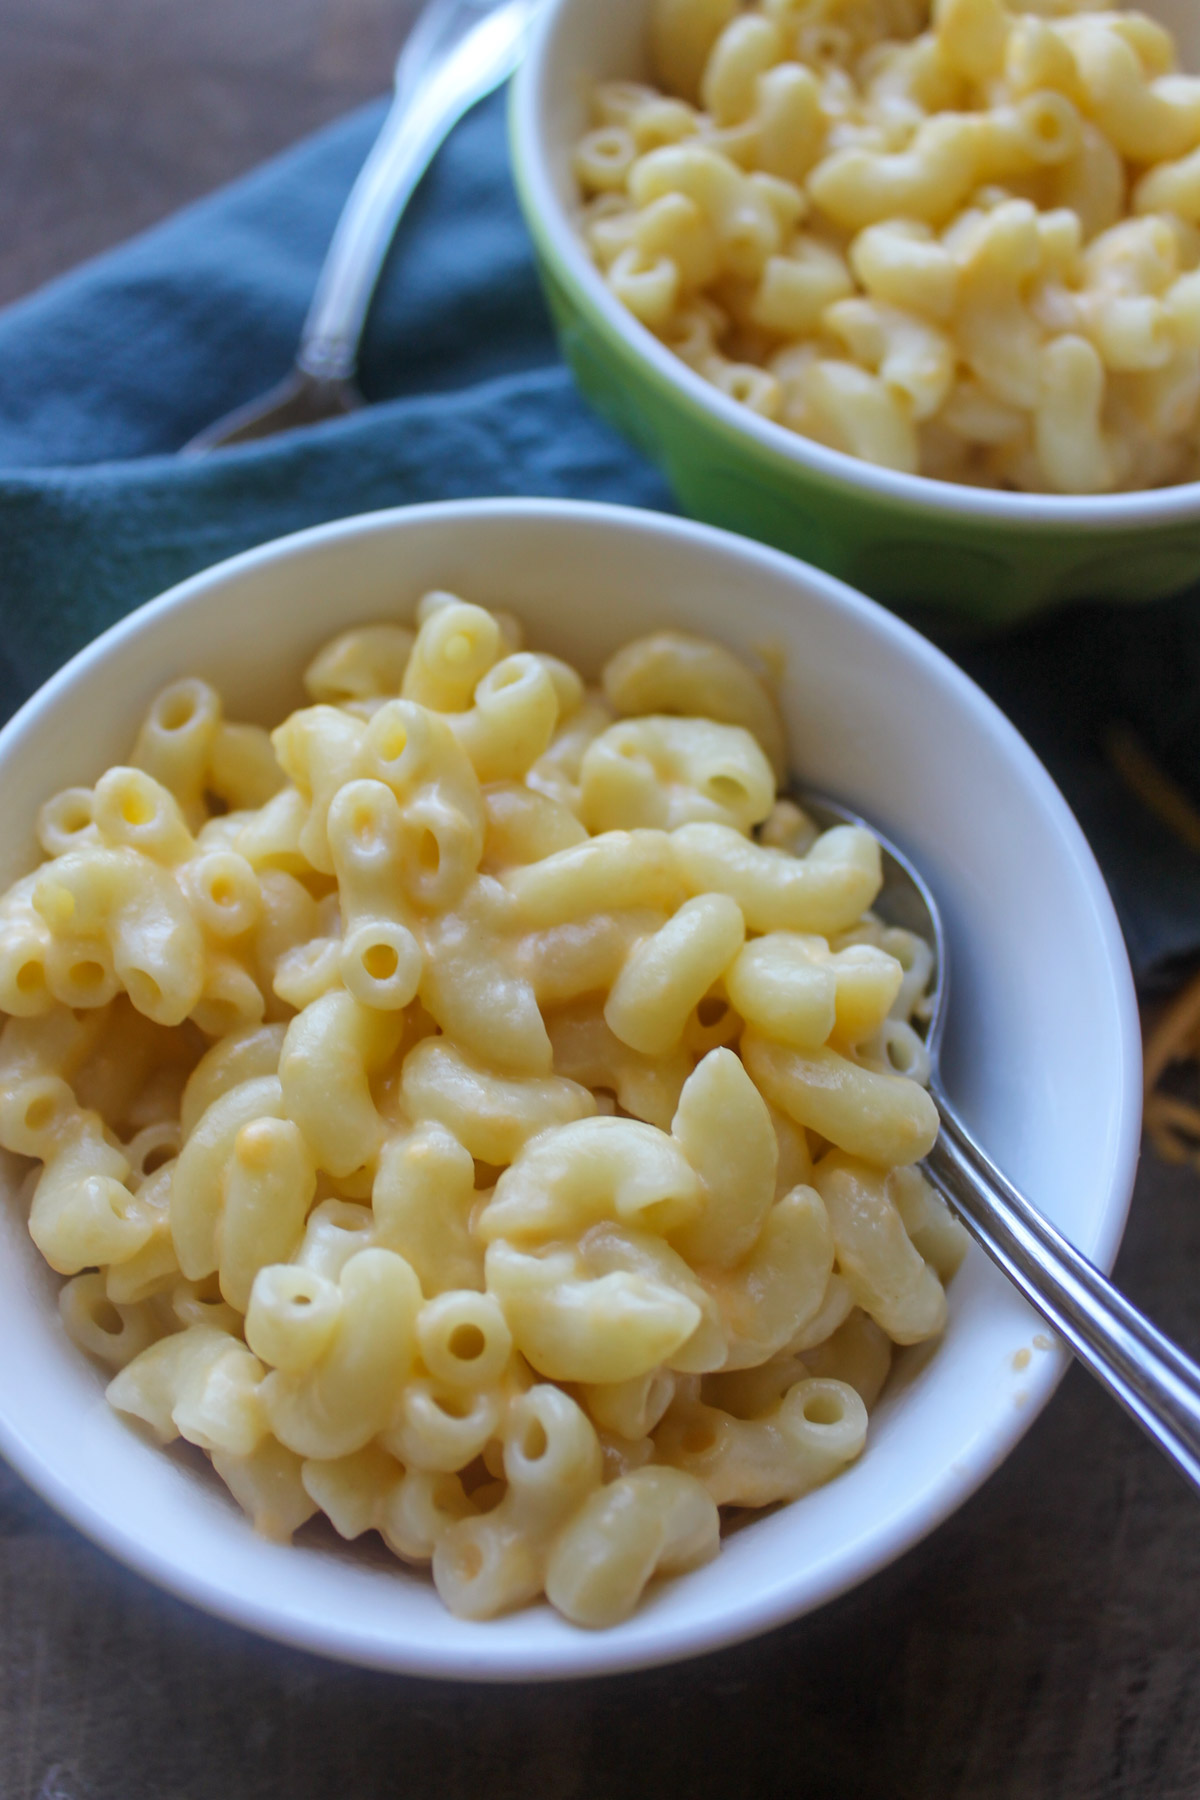 Two small bowls of mac and cheese made with yogurt and shredded cheese.